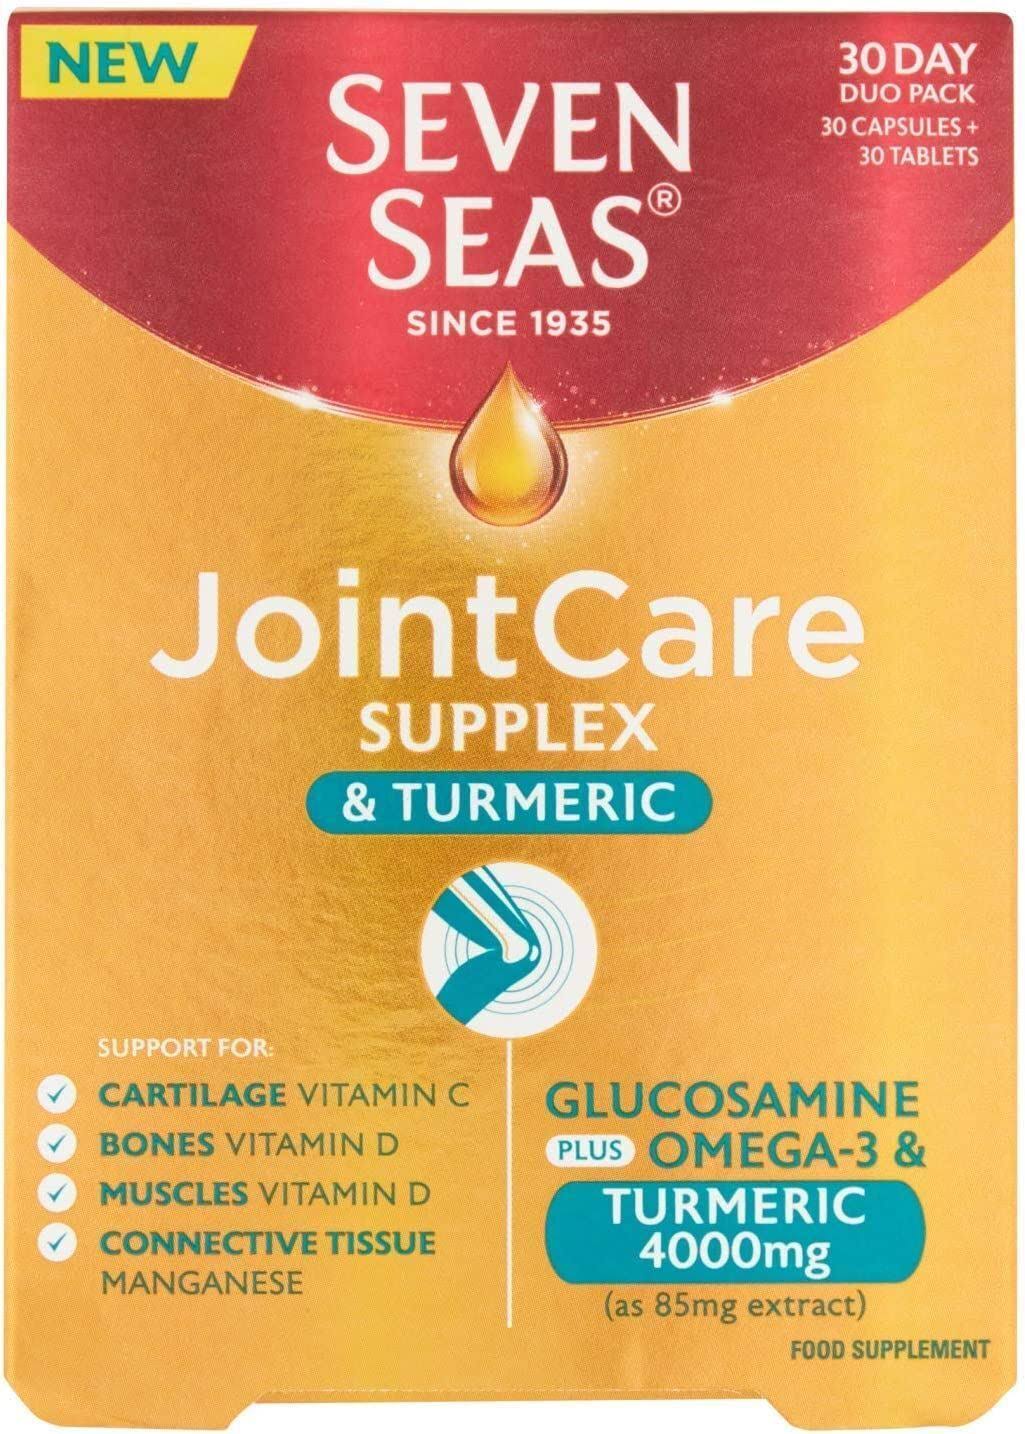 Seven Seas JointCare Supplex and Turmeric with Glucosamine and Omega.